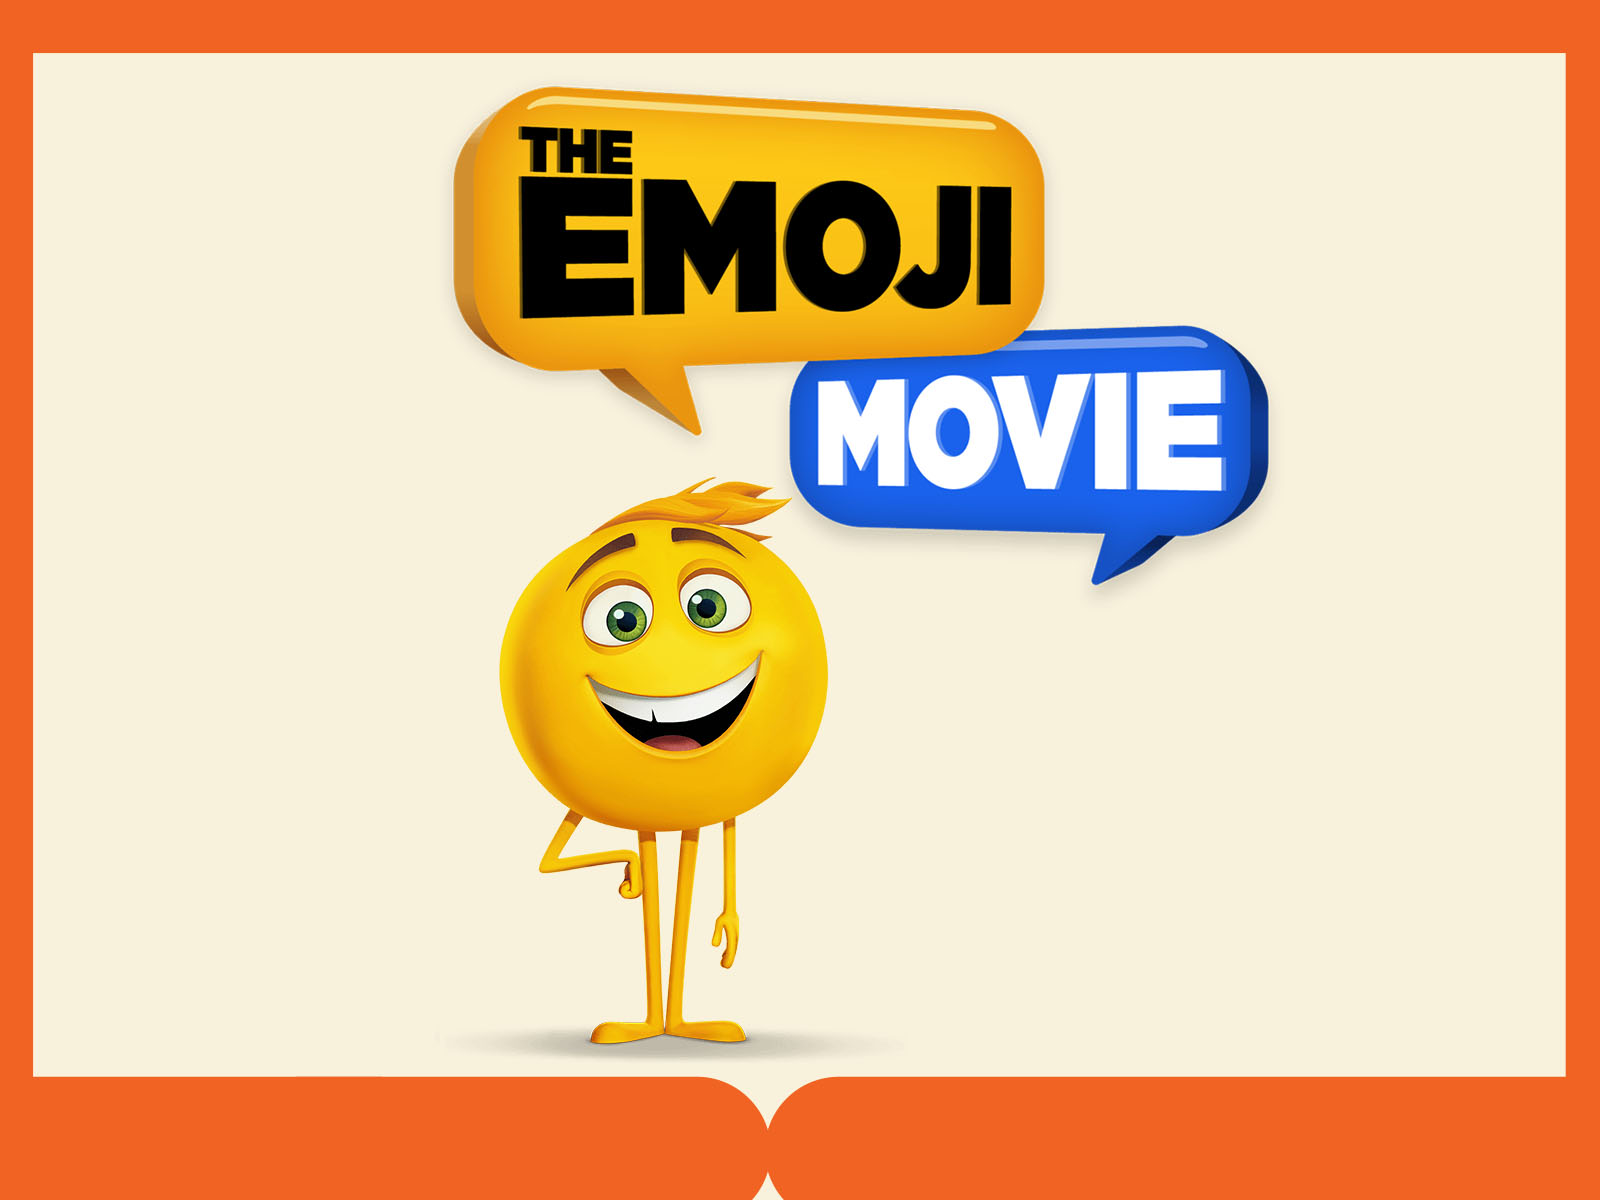 Emoji Movies Backgrounds for Powerpoint Templates - Backgrounds